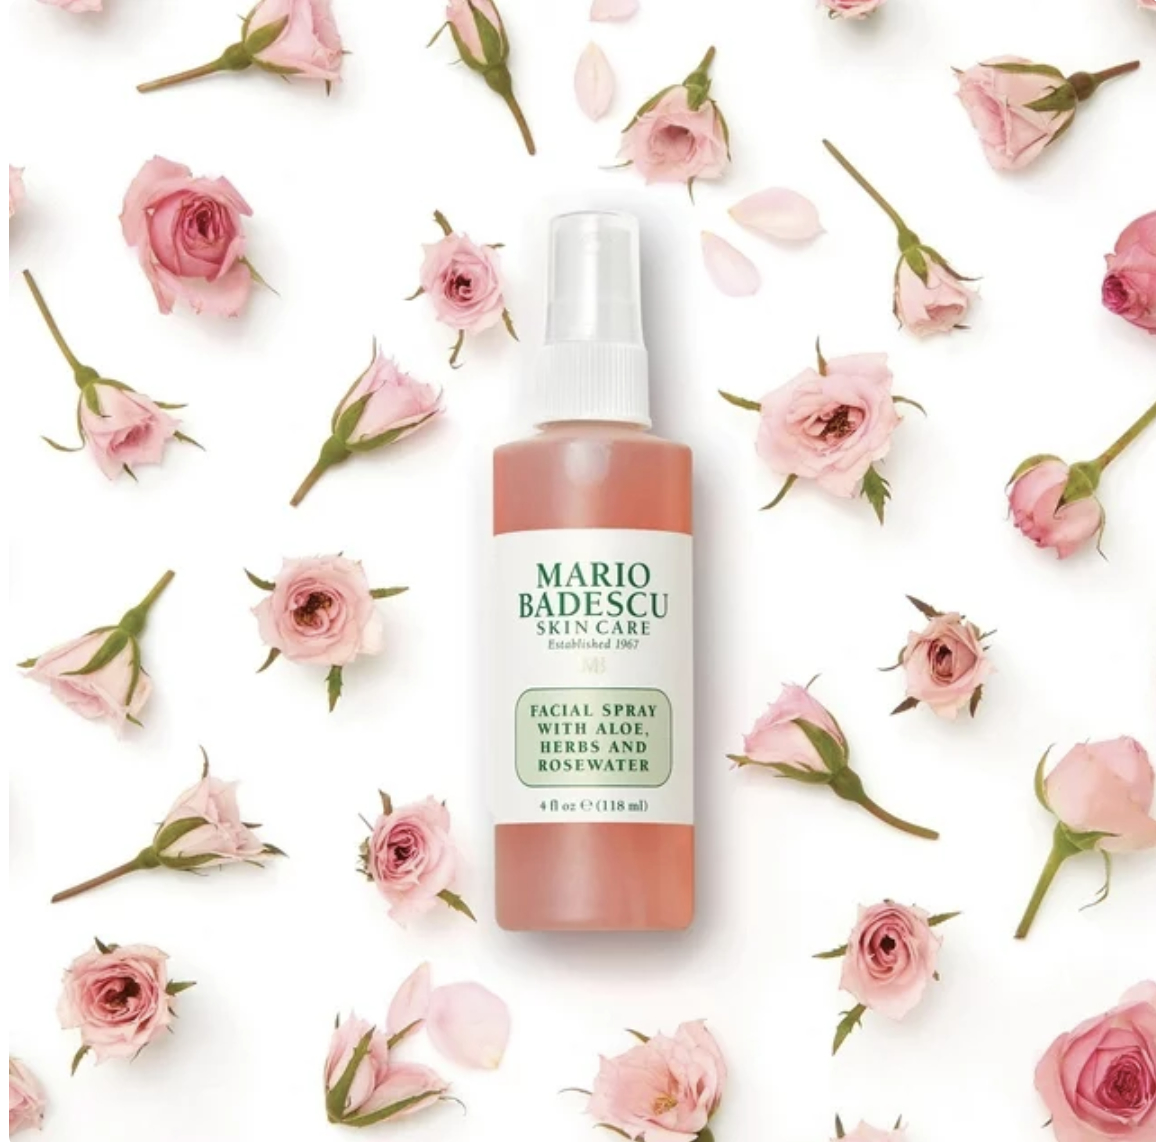 Mario Badescu facial spray bottle with roses scattered around on a plain background